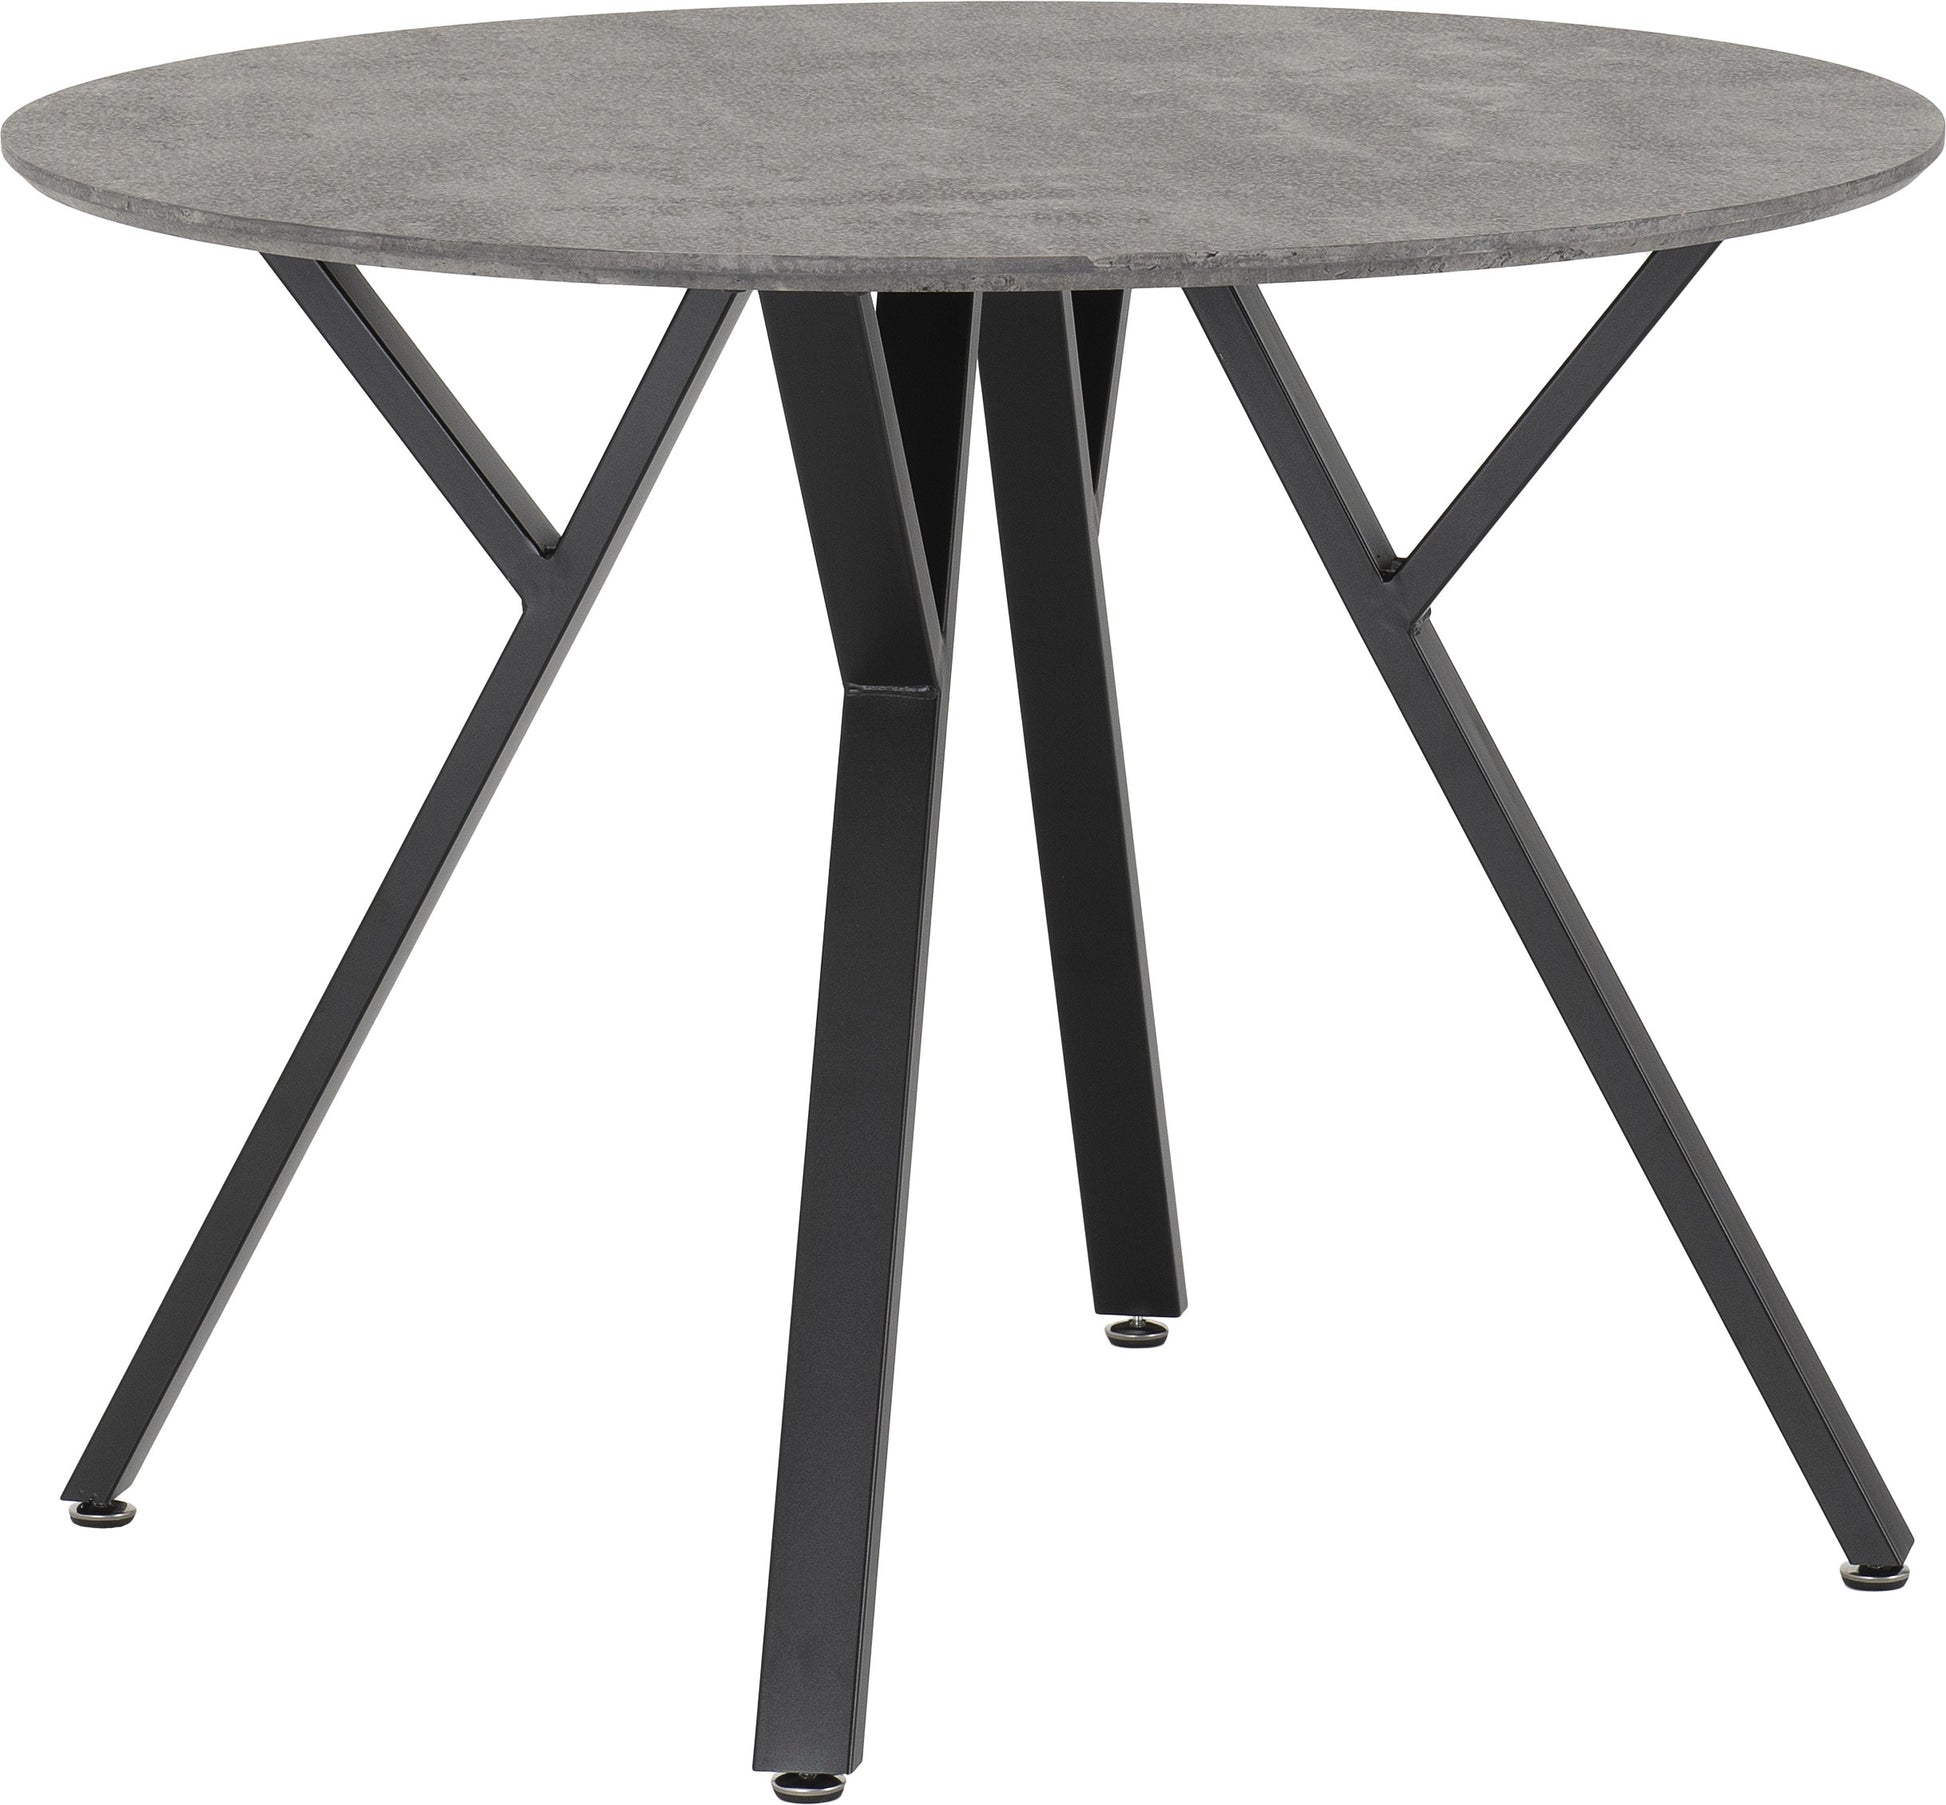 ATHENS-ROUND-DINING-SET-CONCRETE-EFFECT-2021-400-401-191-03.jpgAthens Round Dining Table - Concrete Effect/Black- The Right Buy Store